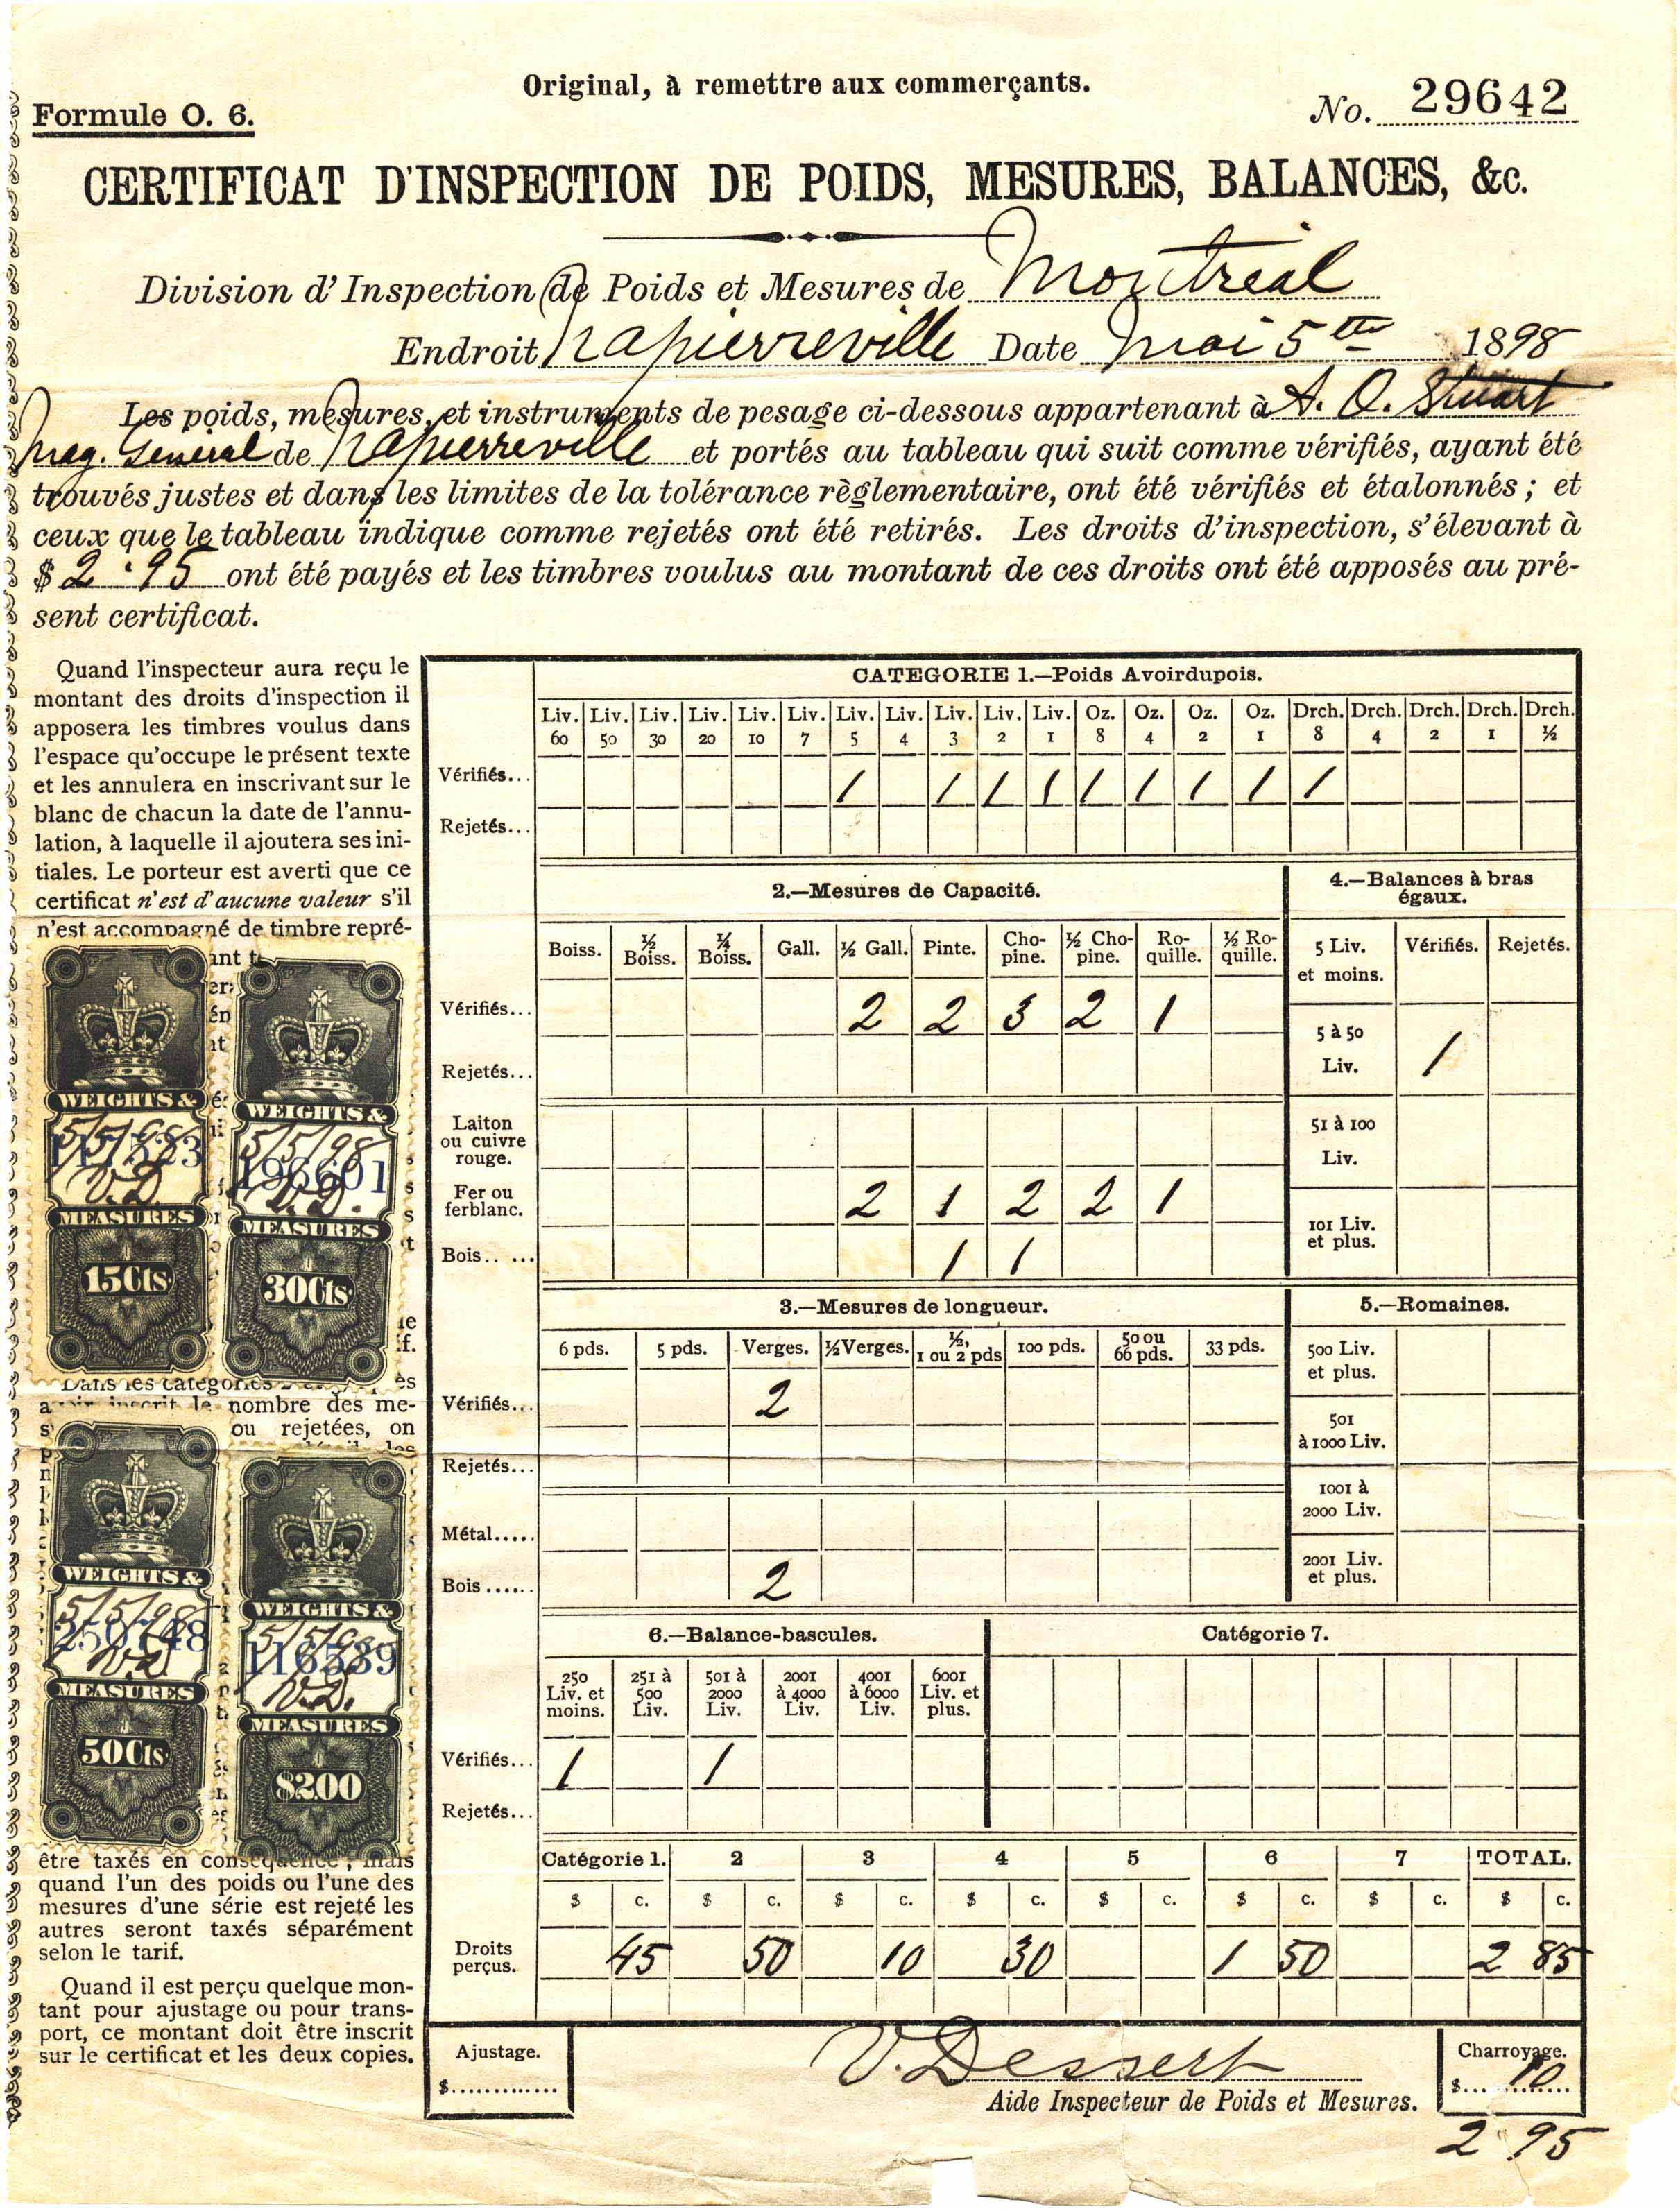 Inspection Certificate with four Weights and Measures stamps